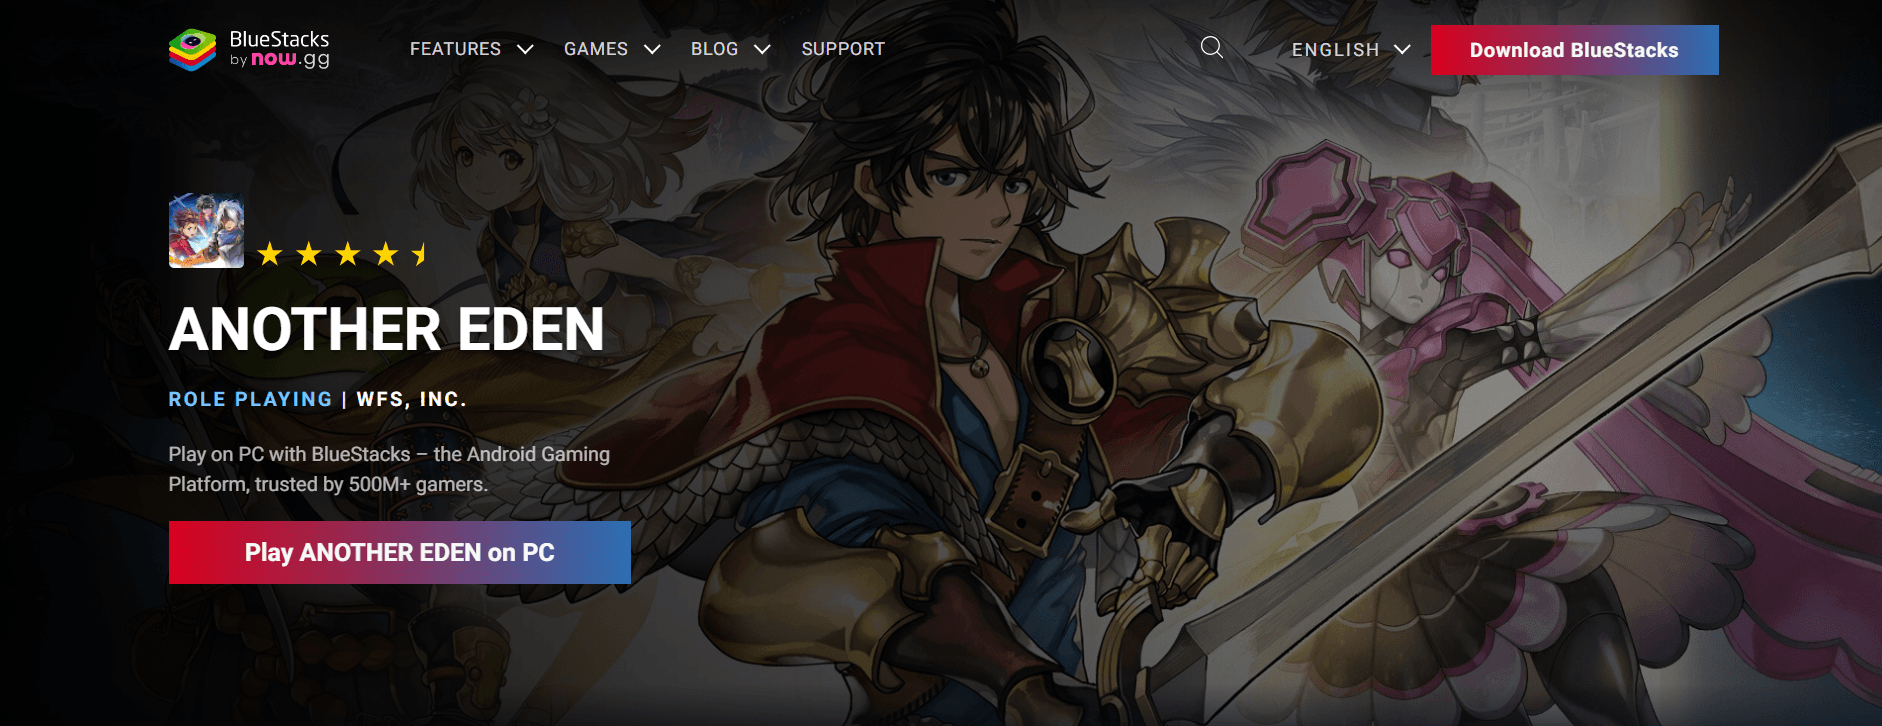 Another Eden: The Cat Beyond Time and Space Extreme Update